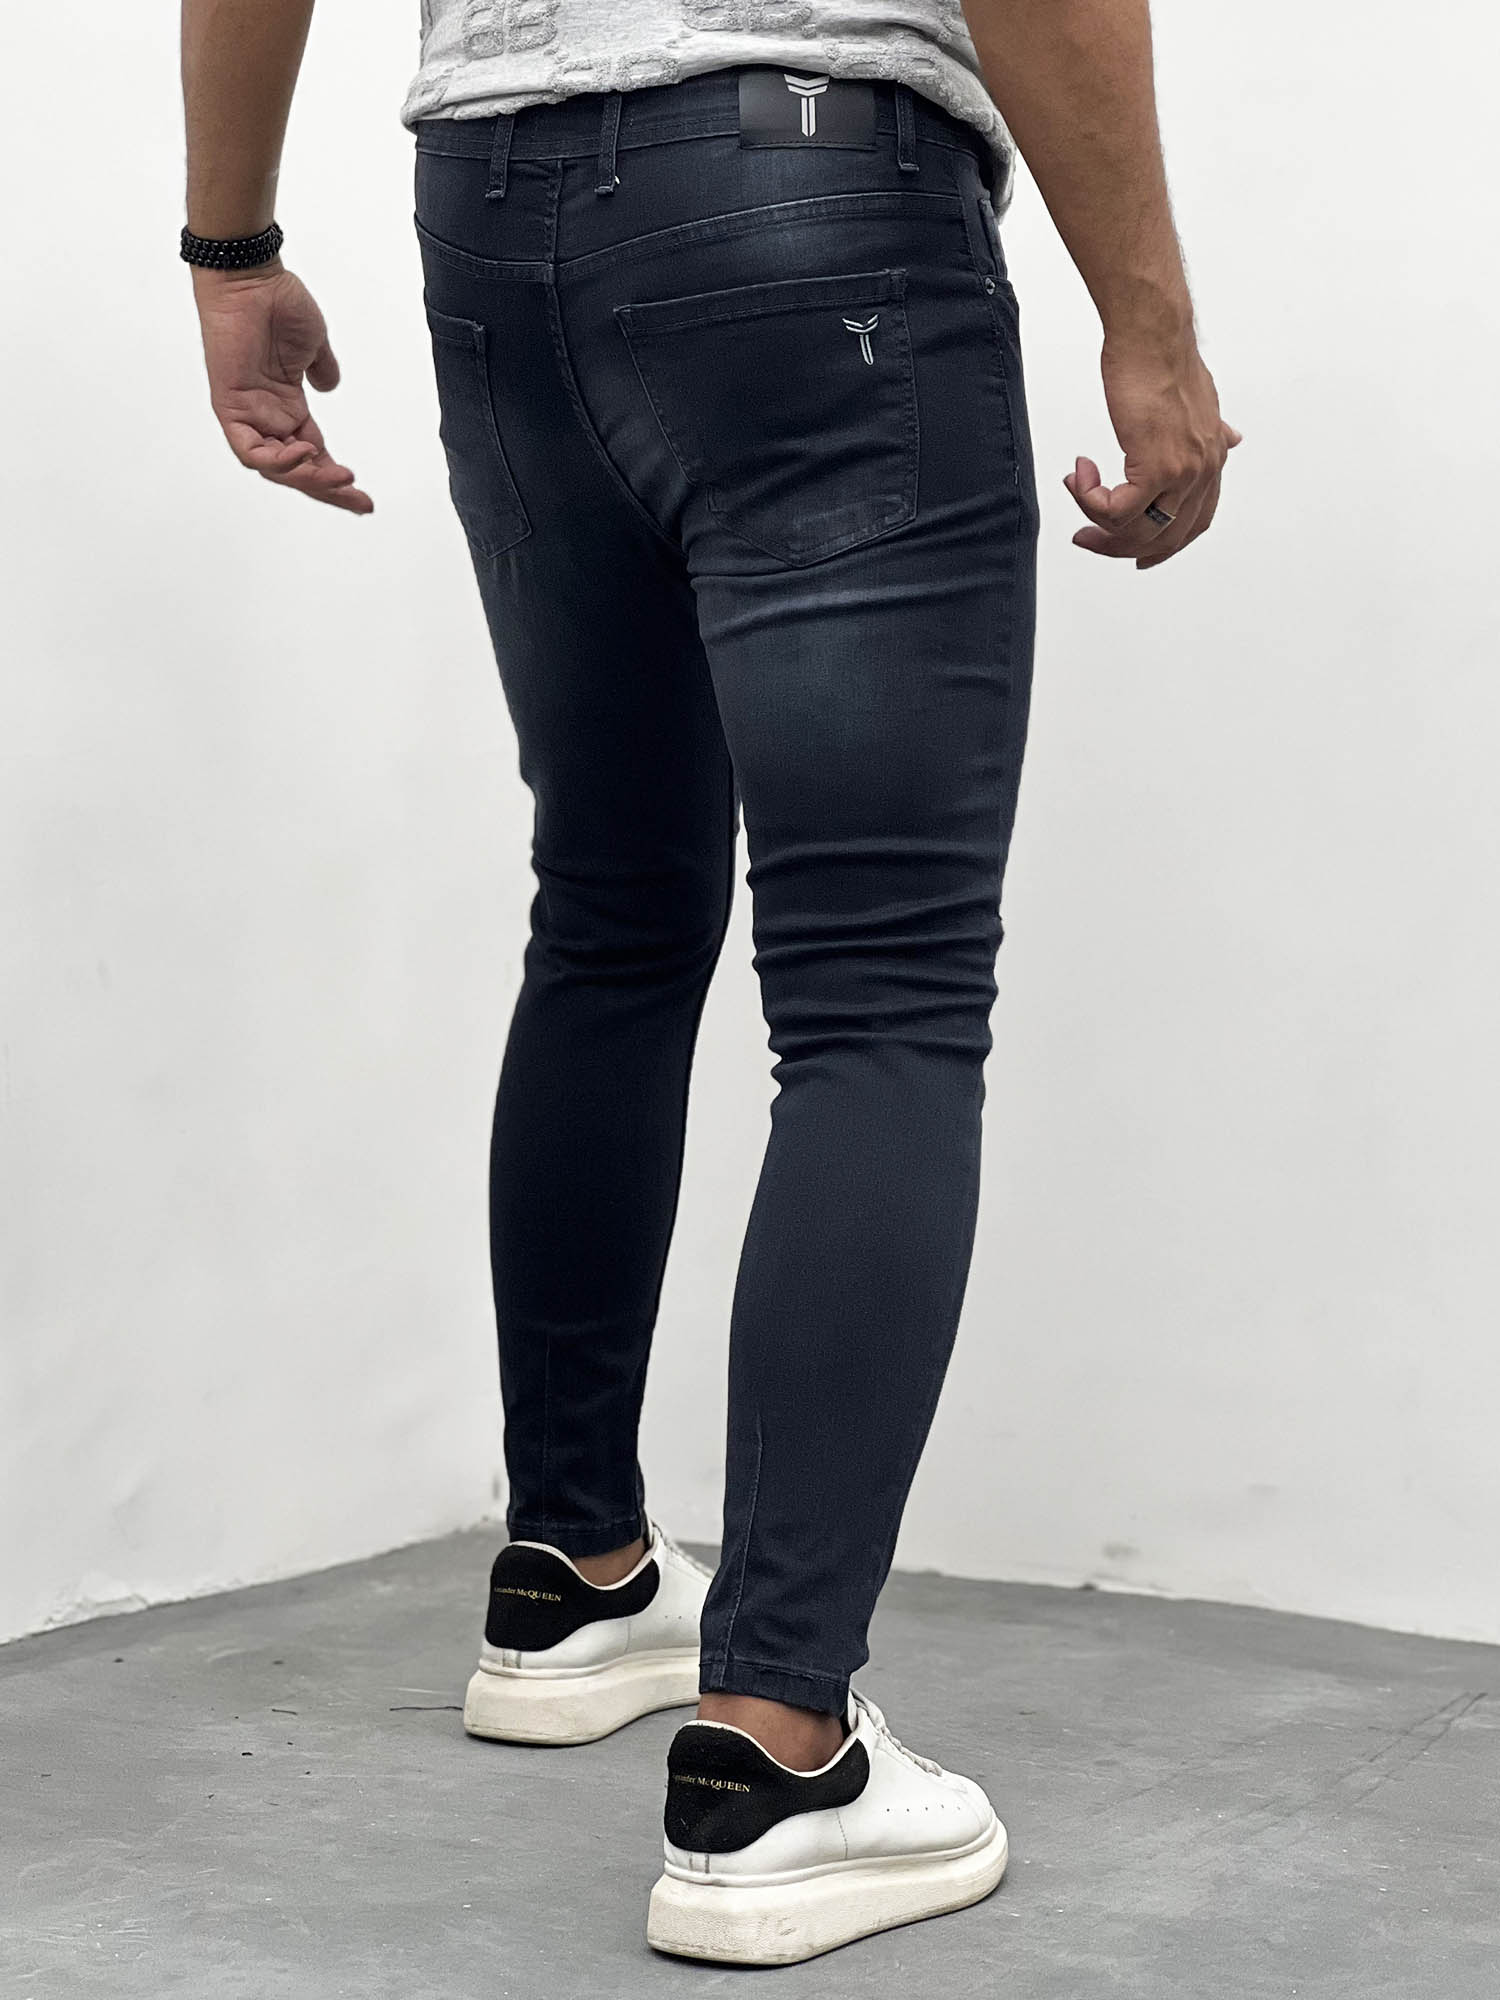 Turbo Ankle Fit Jeans In Faded Black